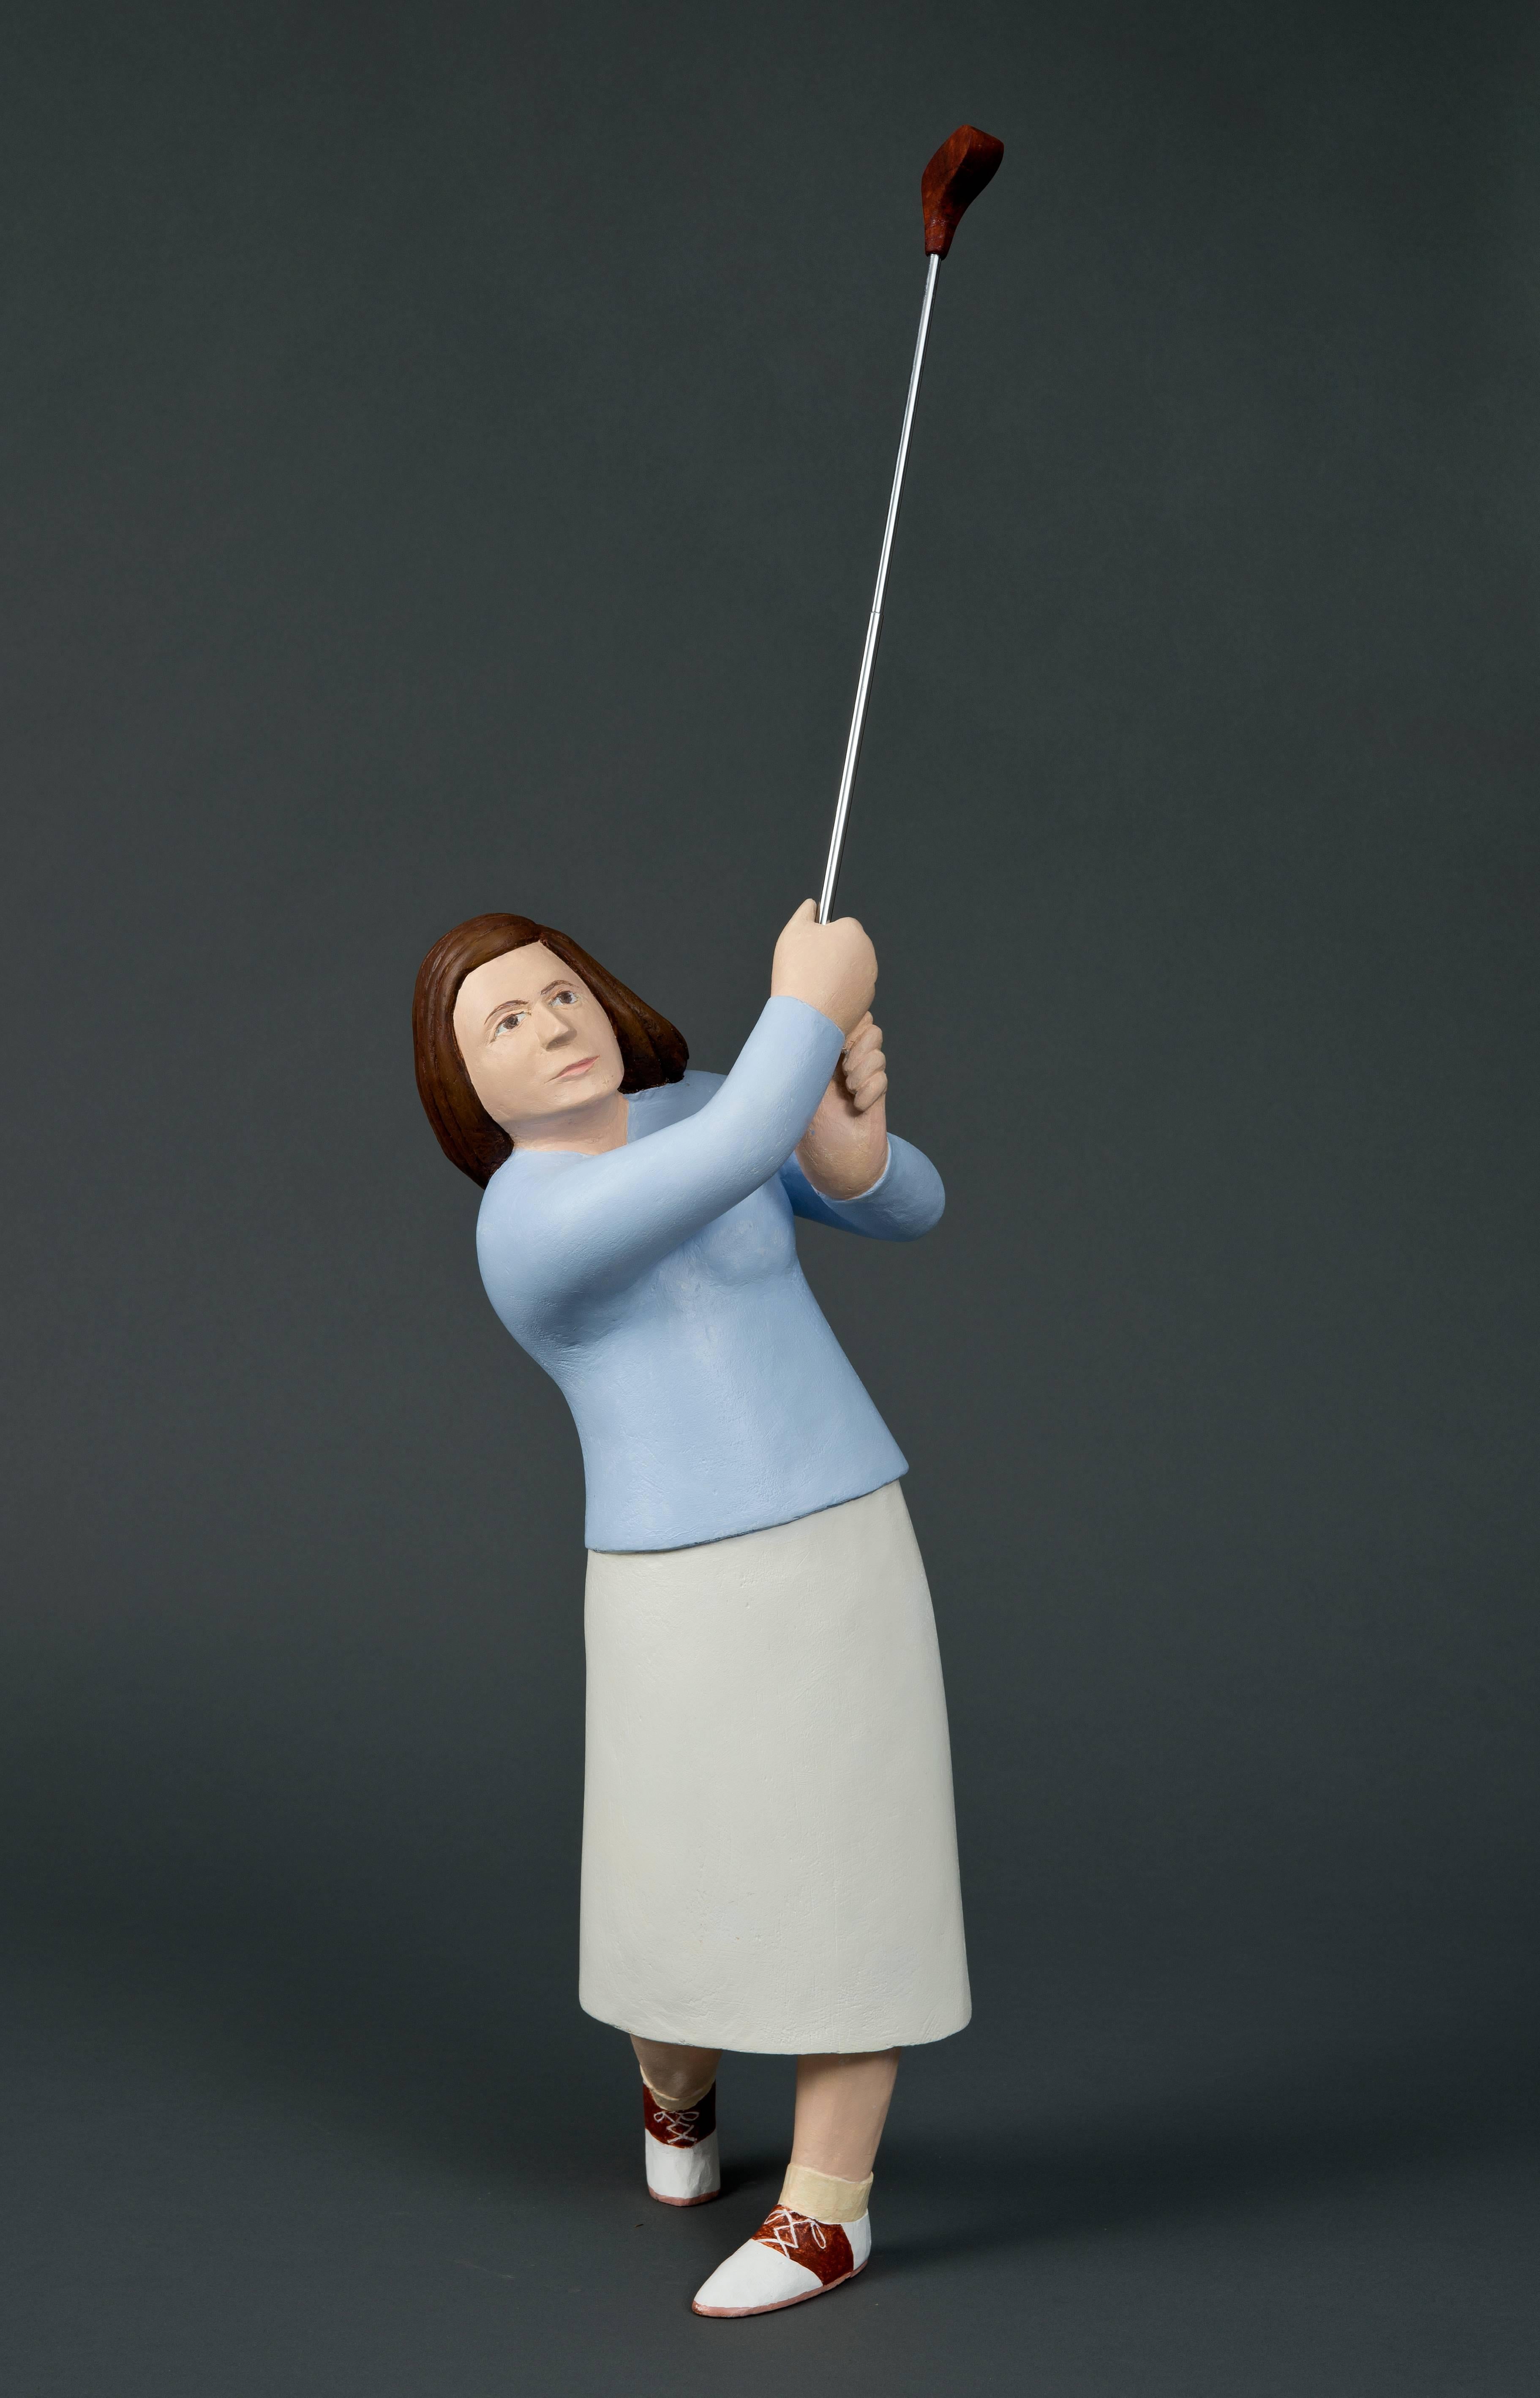 John Cross Figurative Sculpture - Right Down The Middle (Carved Wooden Sculpture of Female Golfer with Club)